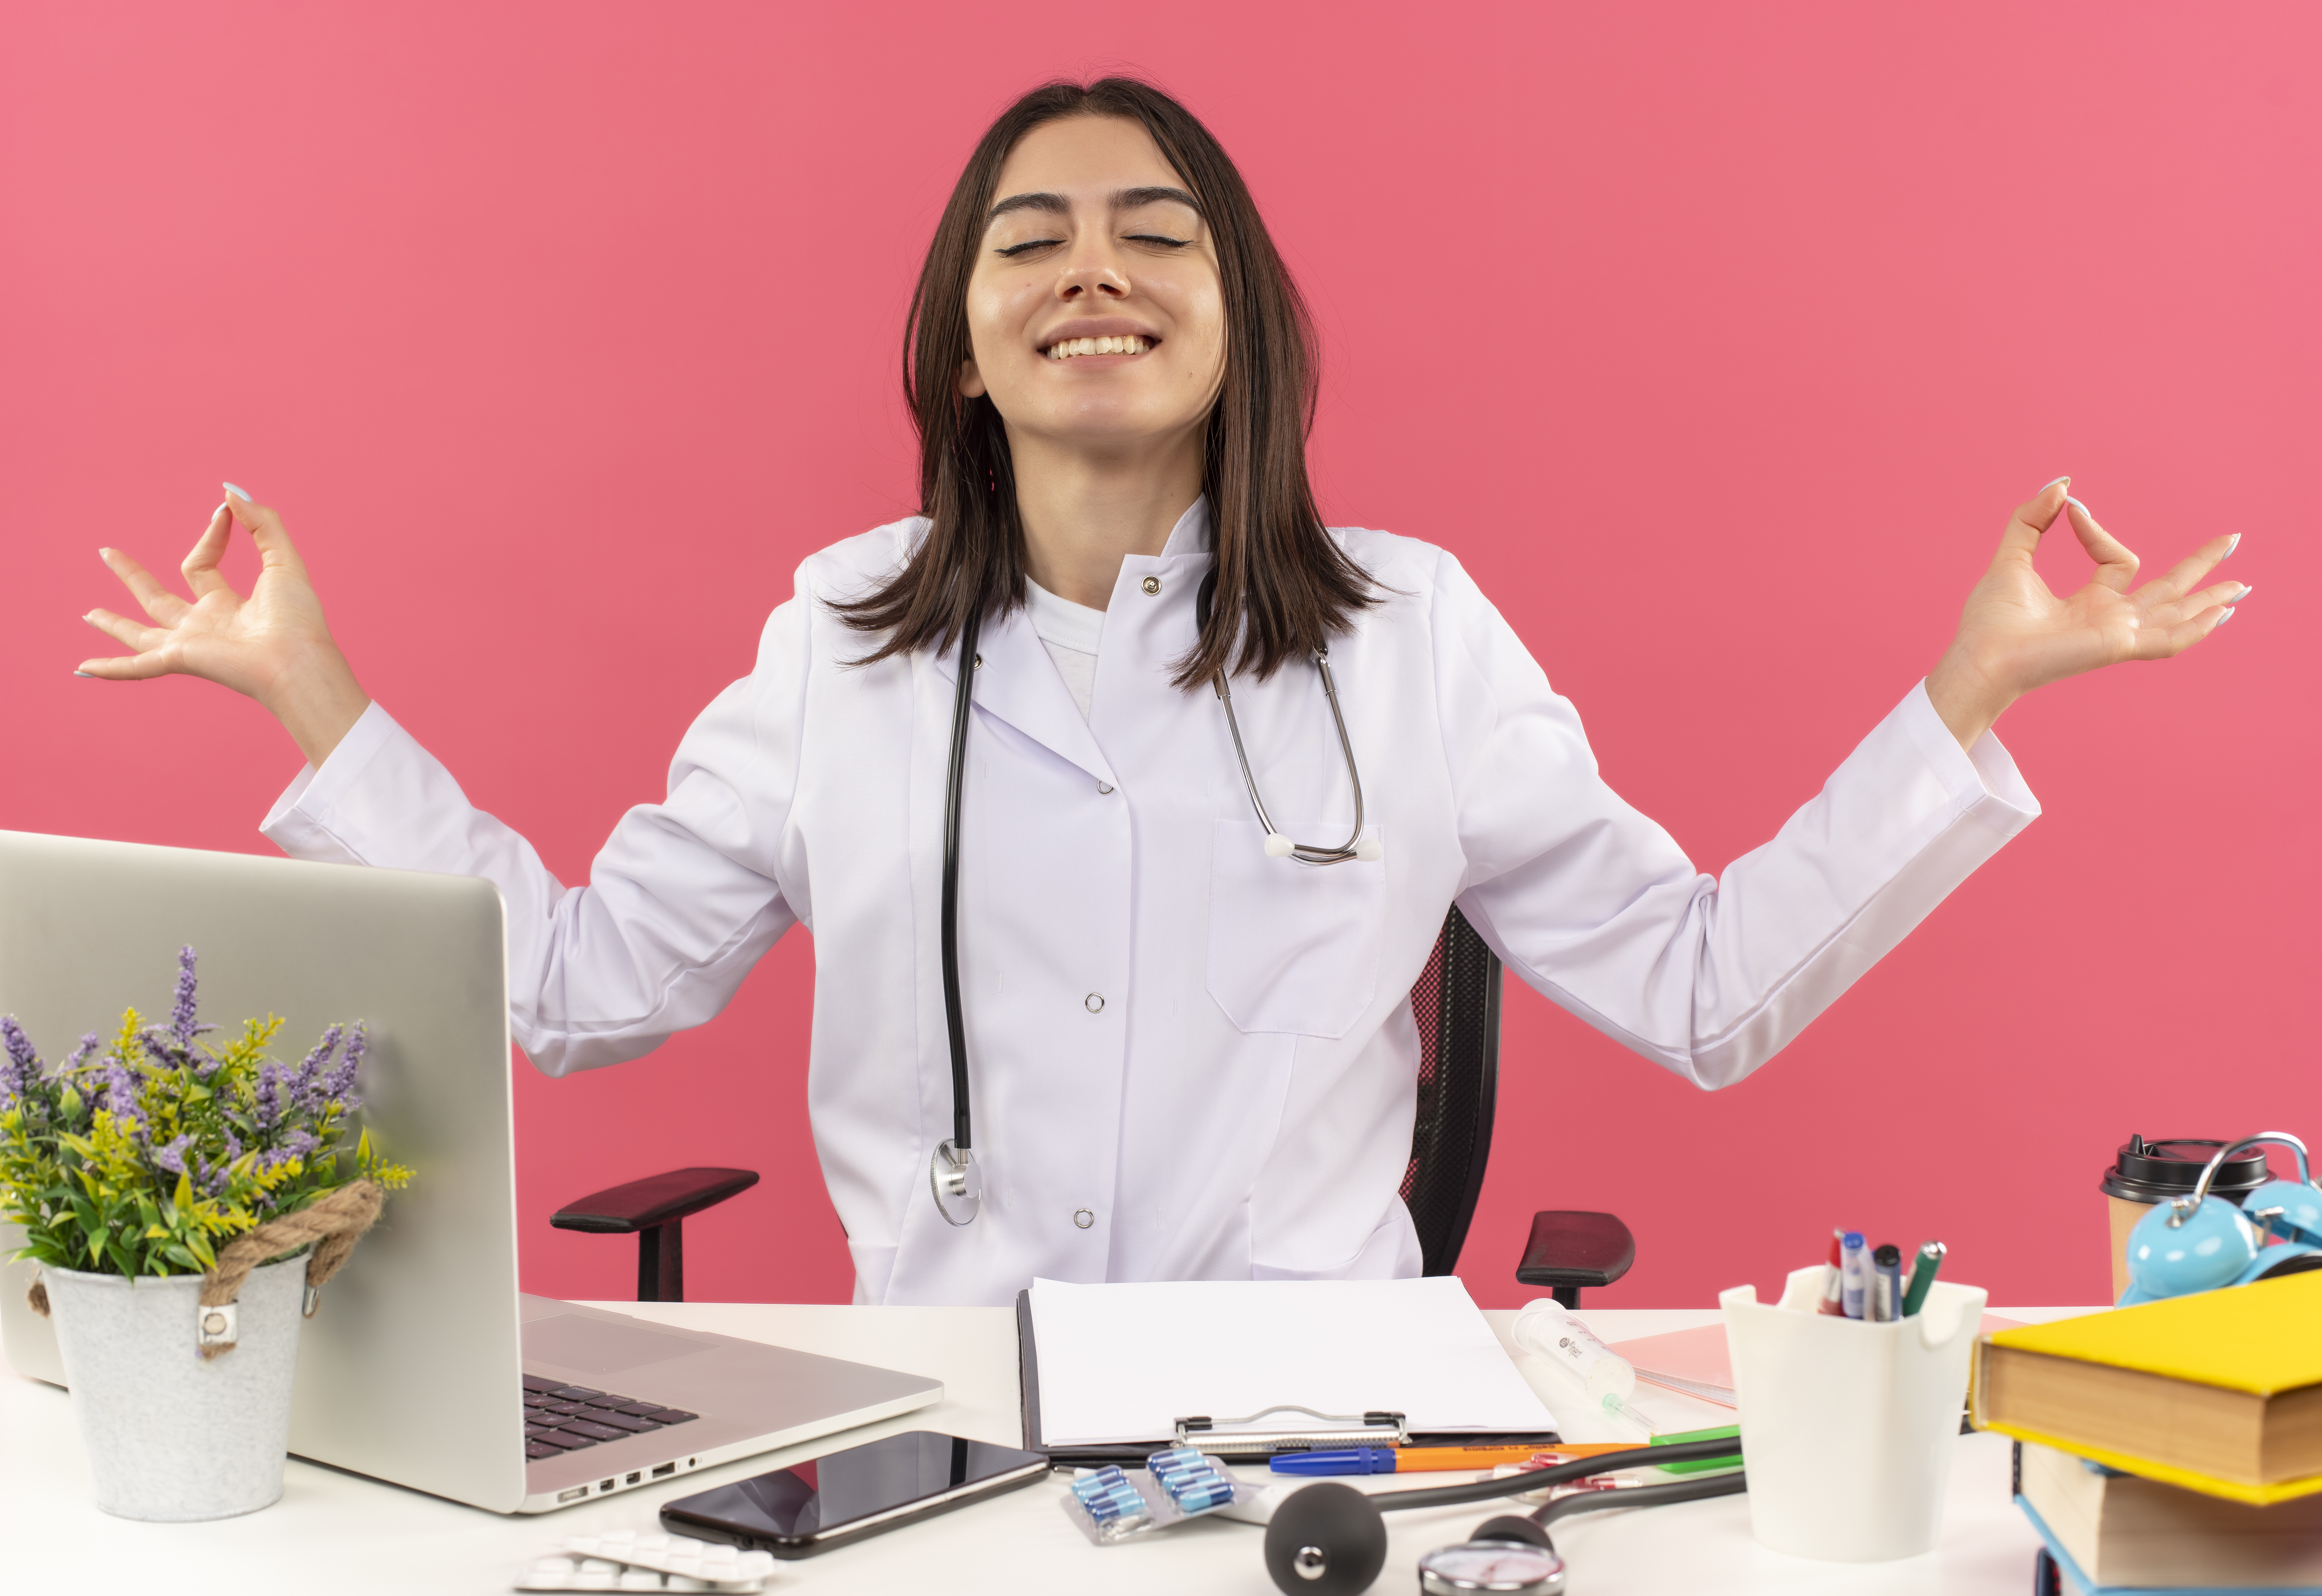 Work-Life Balance Tips for Mexican Nurses Working in the U.S.